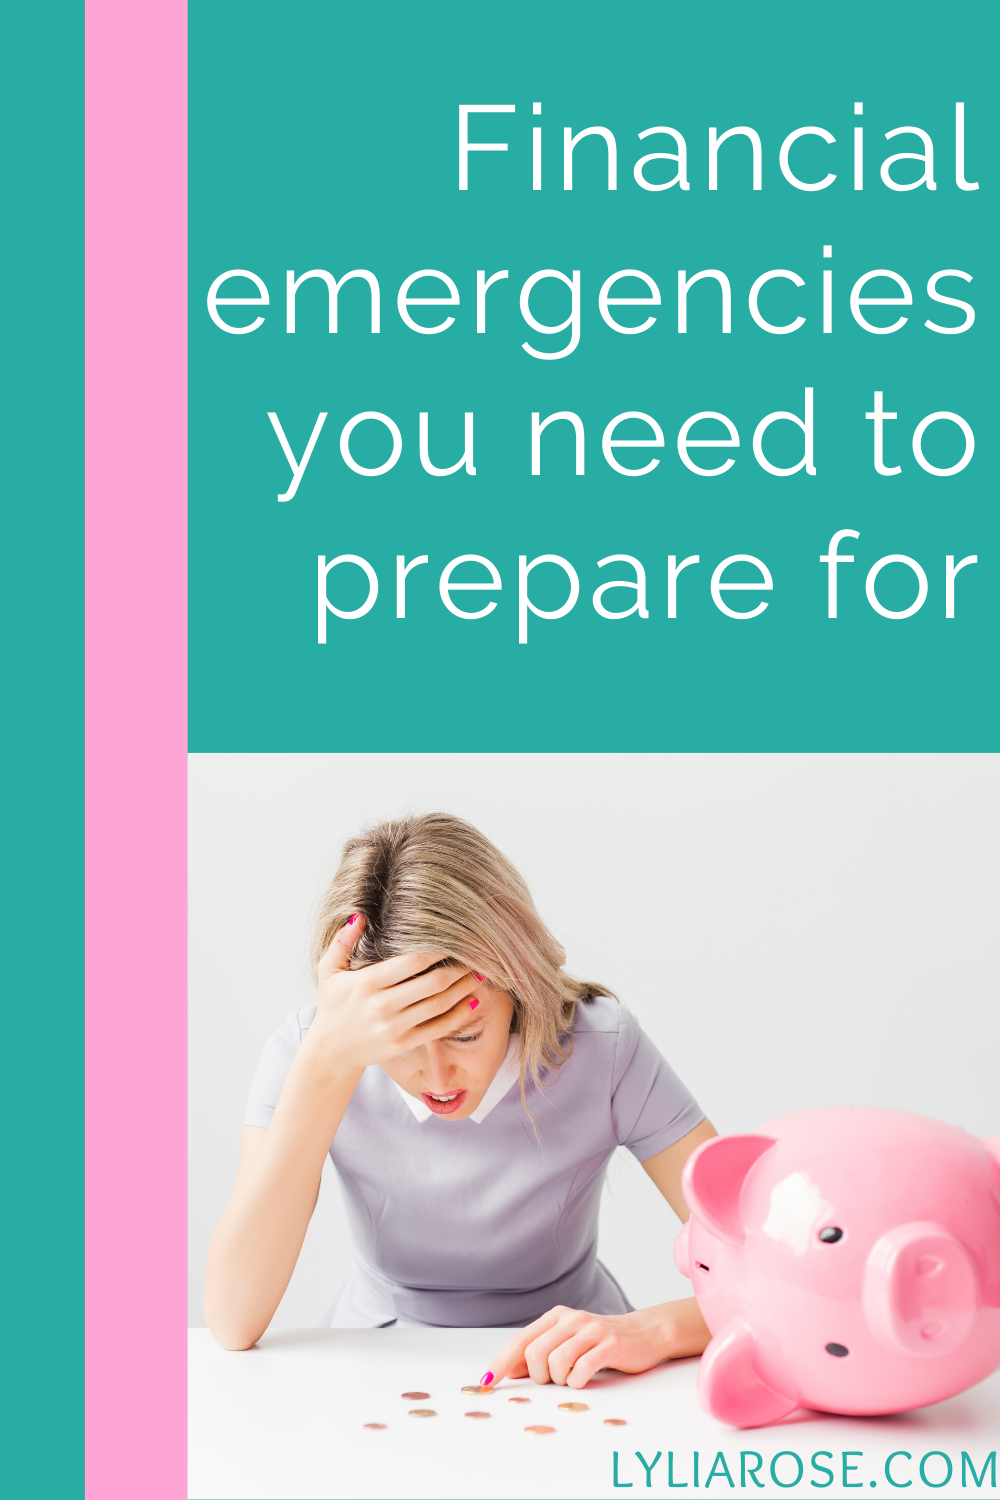 Financial emergencies you need to prepare for